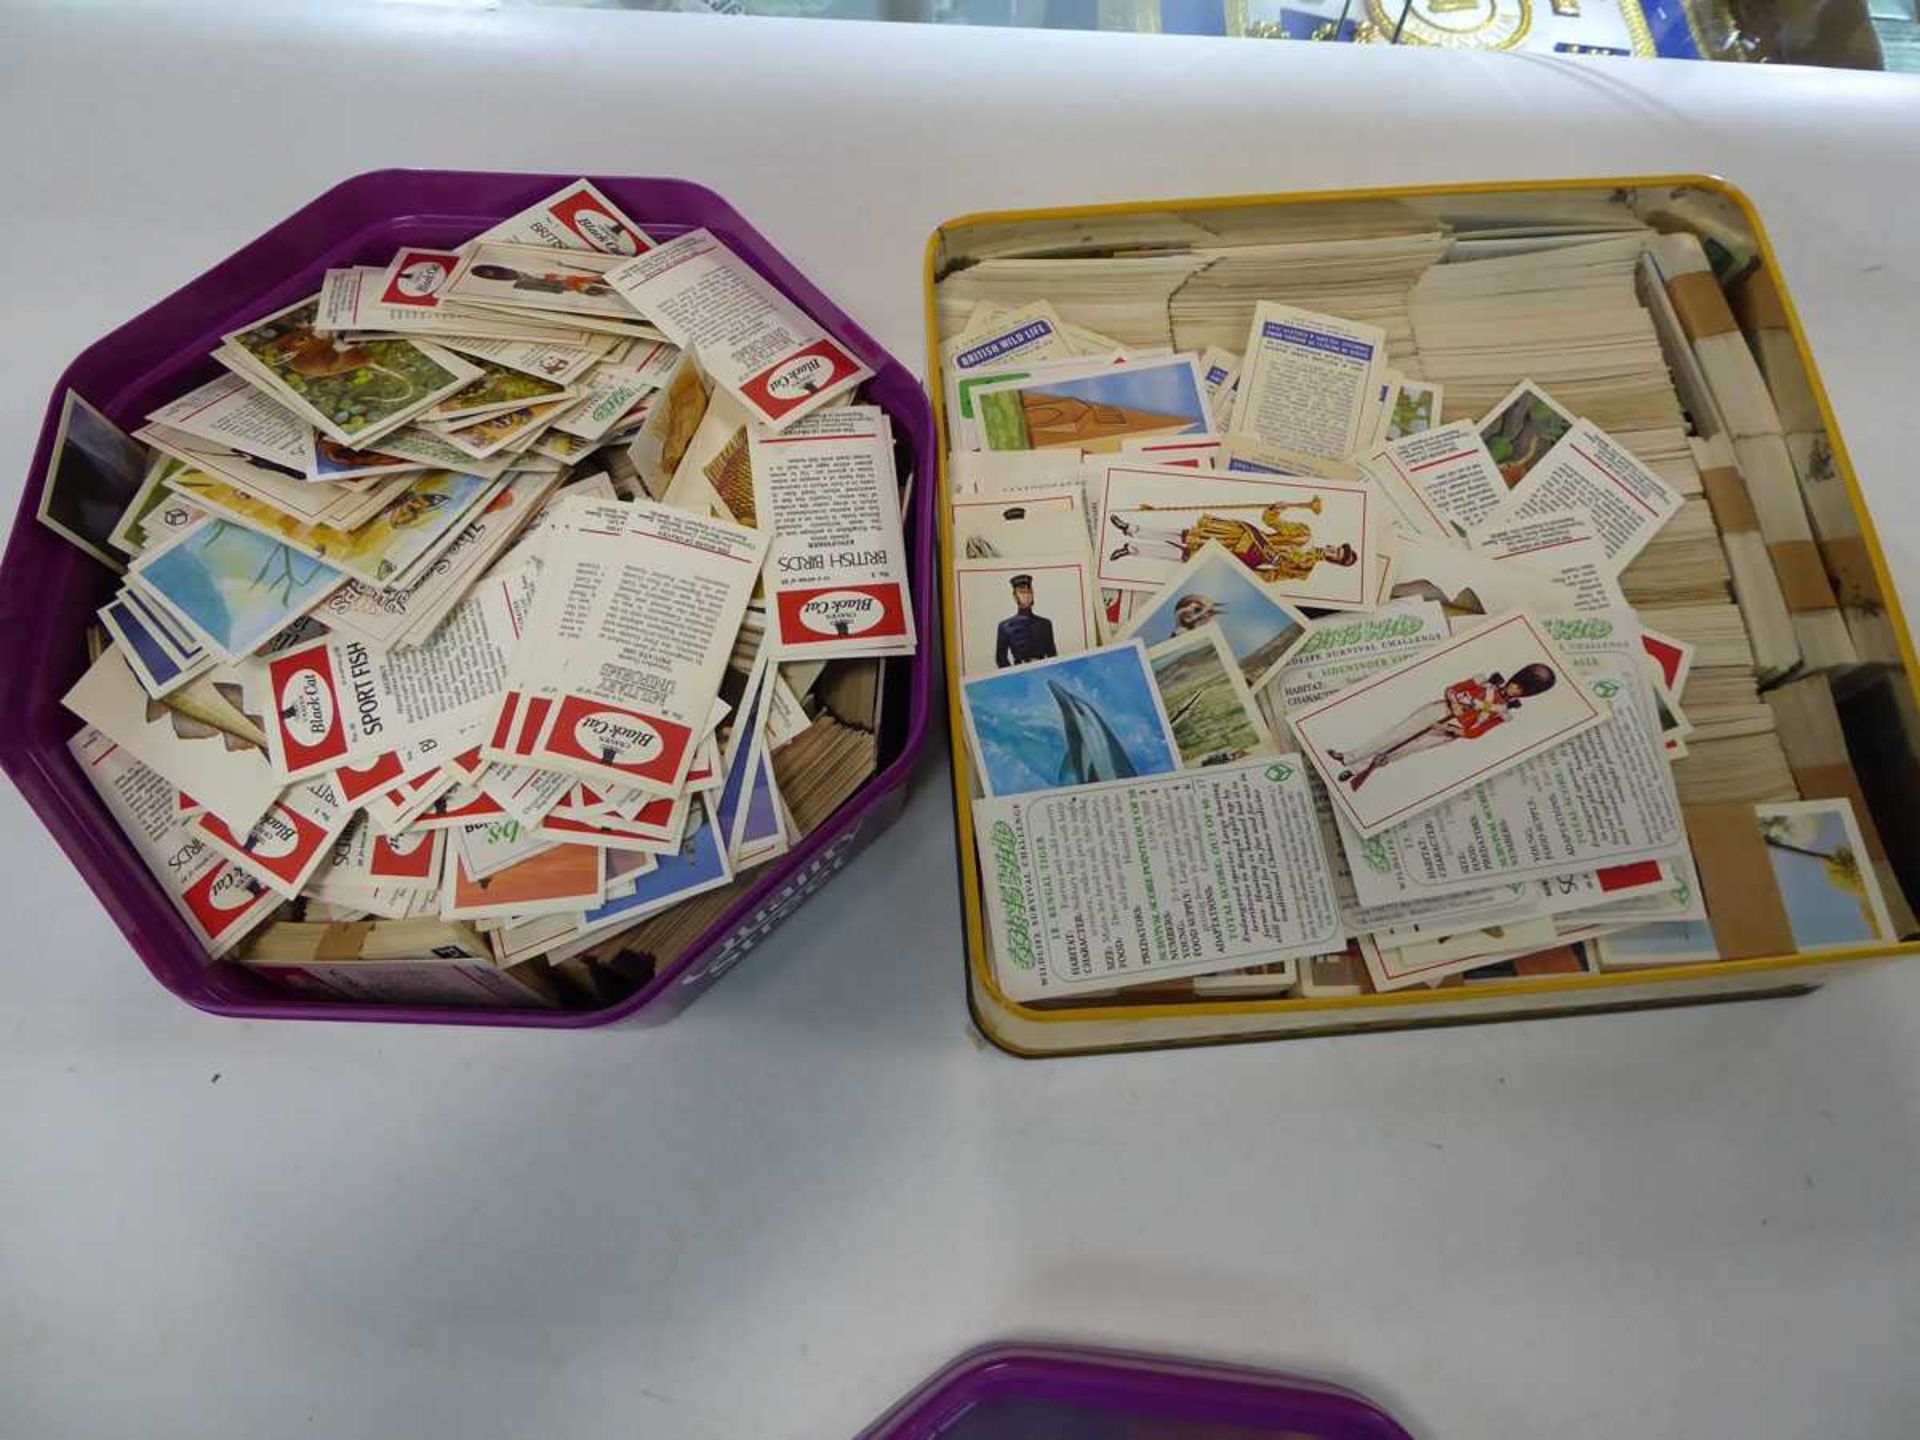 2 boxes containing cigarette cards